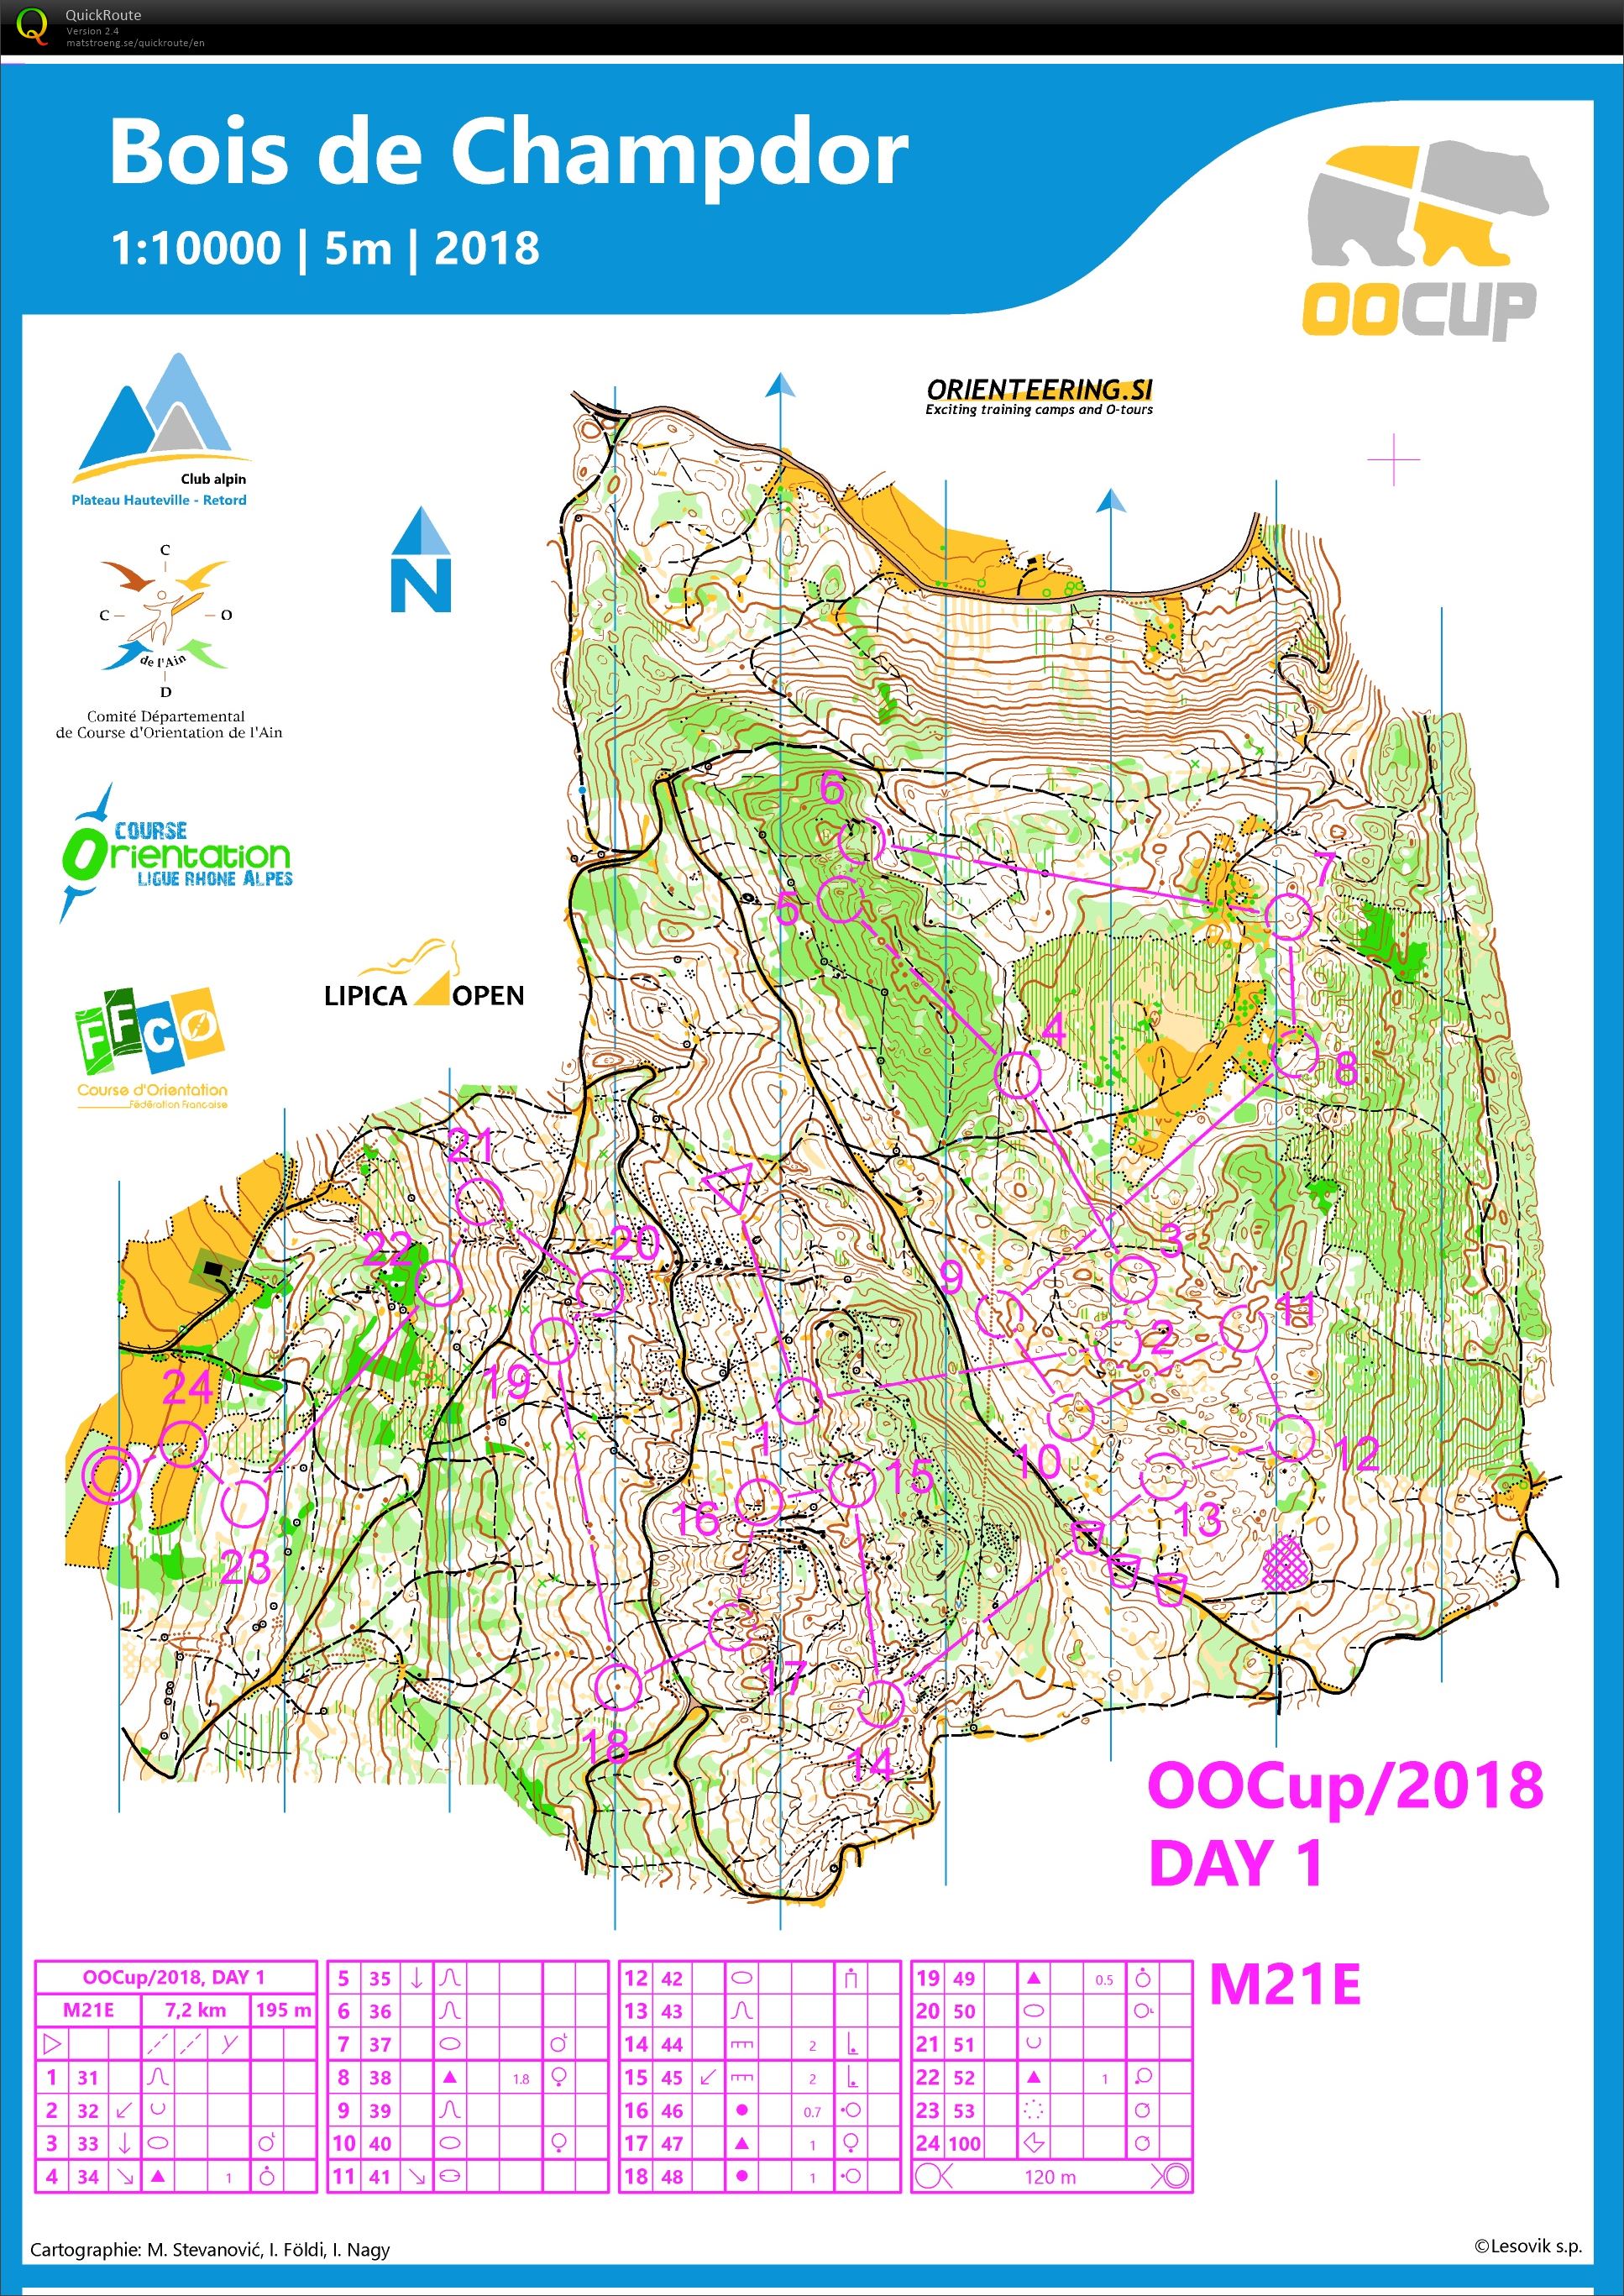 OOCup Stage 1 (25.07.2018)